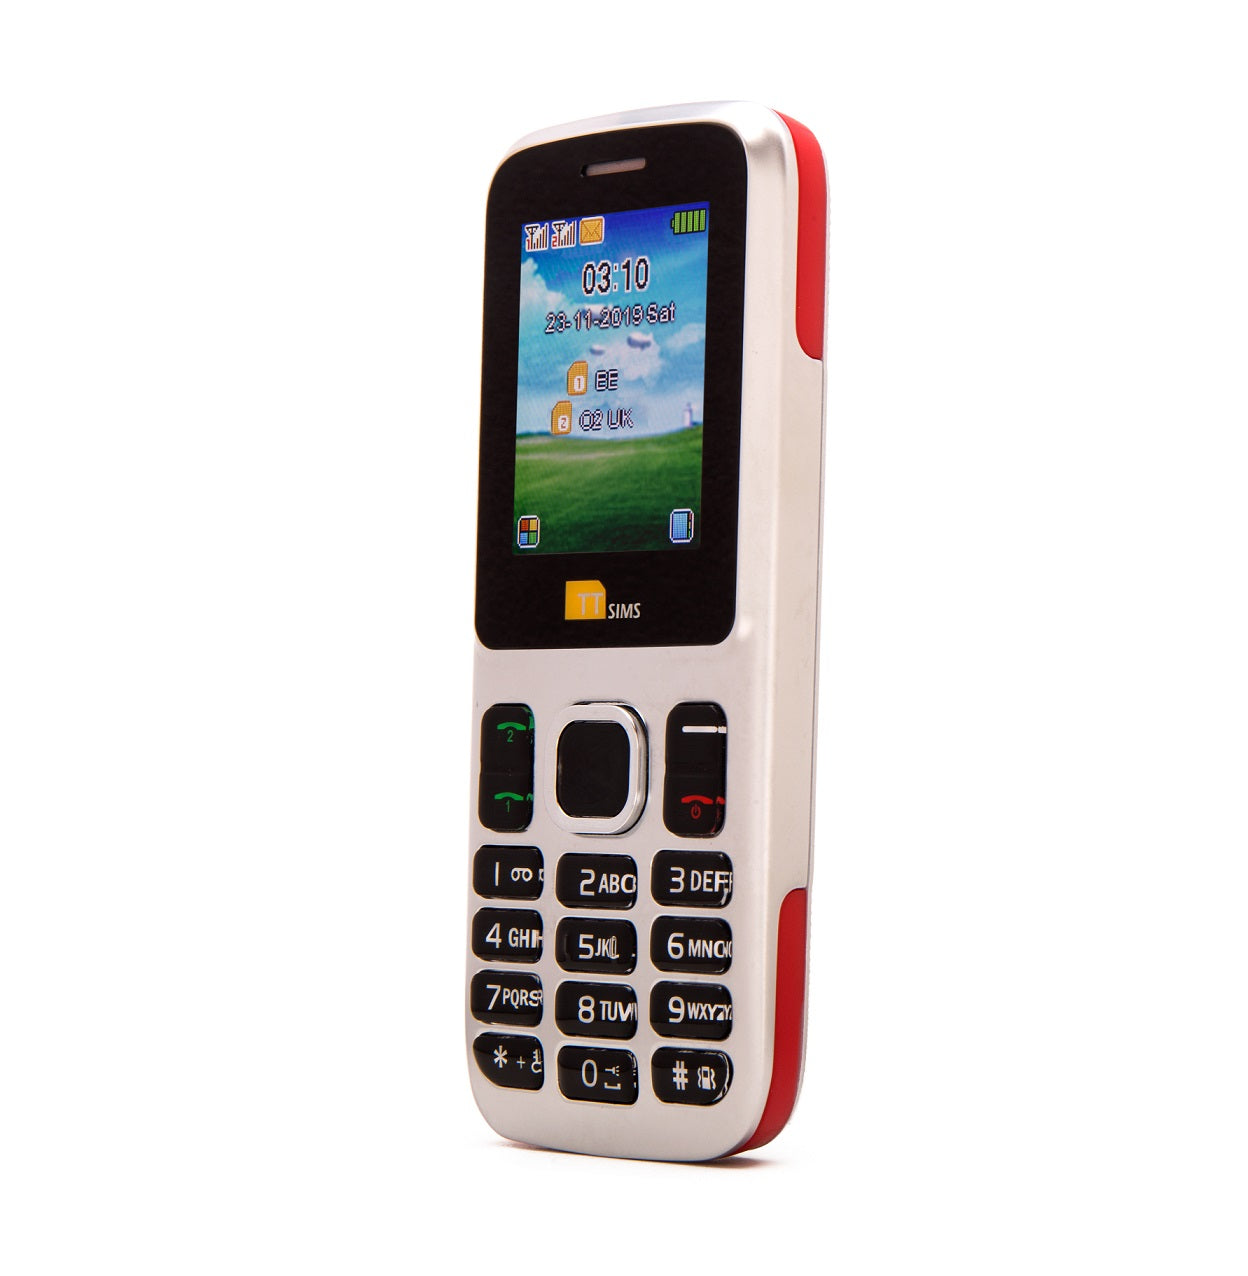 TTfone Red TT130 Dual Sim - Warehouse Deals with USB Cable and Giff Gaff Pay As You Go